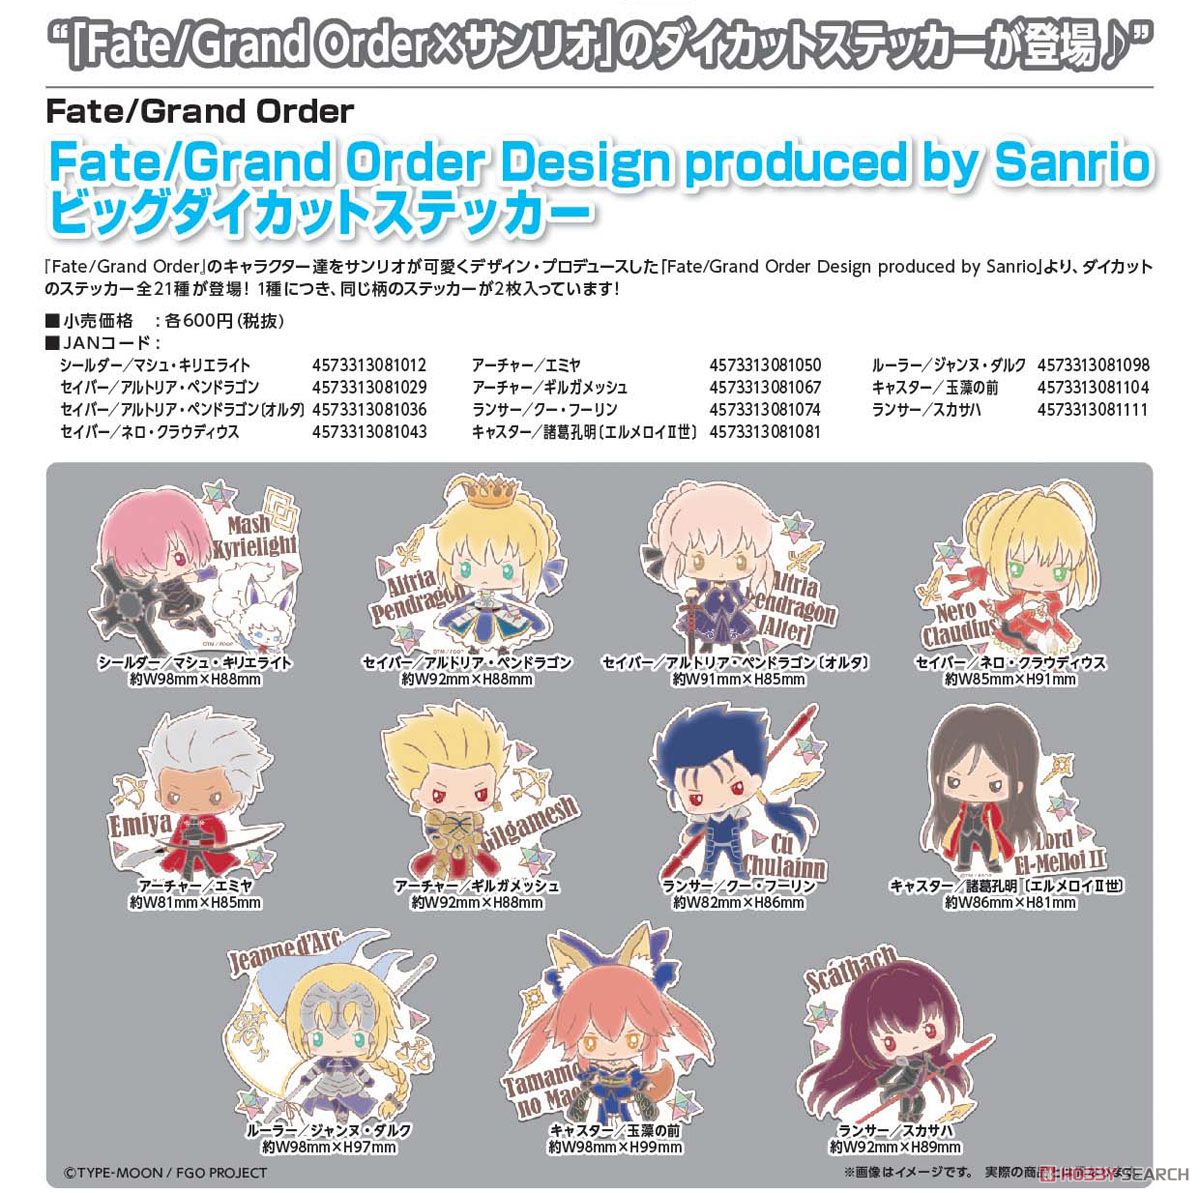 Fate/Grand Order Design produced by Sanrio ビッグダイカットステッカー アヴェンジャー/ジャンヌ・ダルク[オルタ] (キャラクターグッズ) その他の画像1